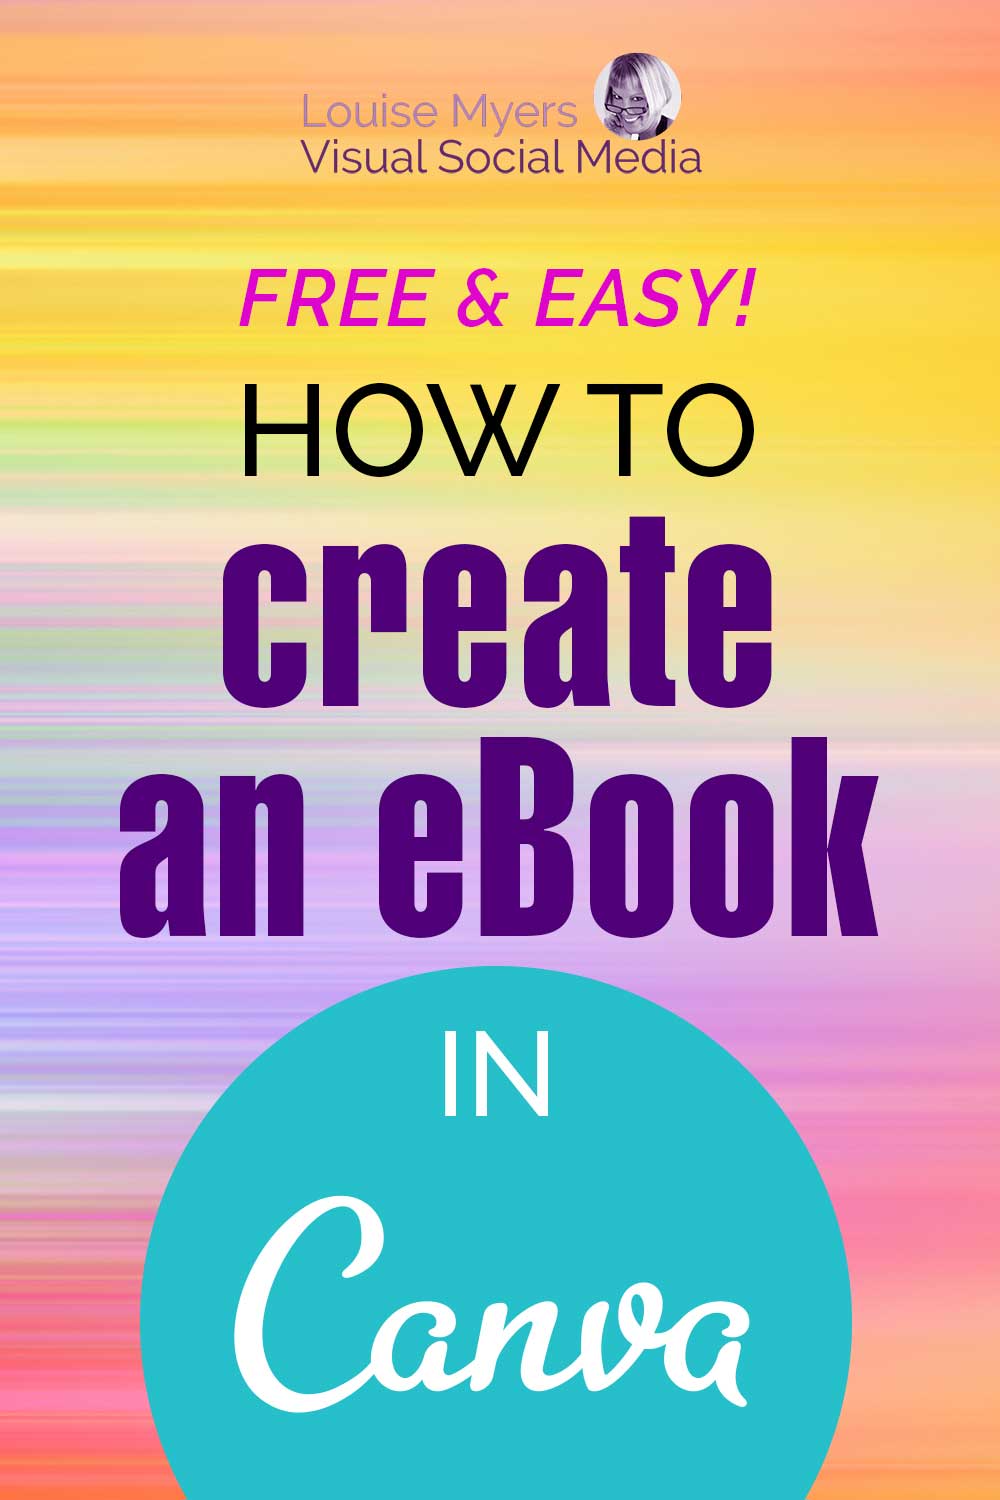 pinnable image says how to create an ebook in canva free and easy on pastel background.